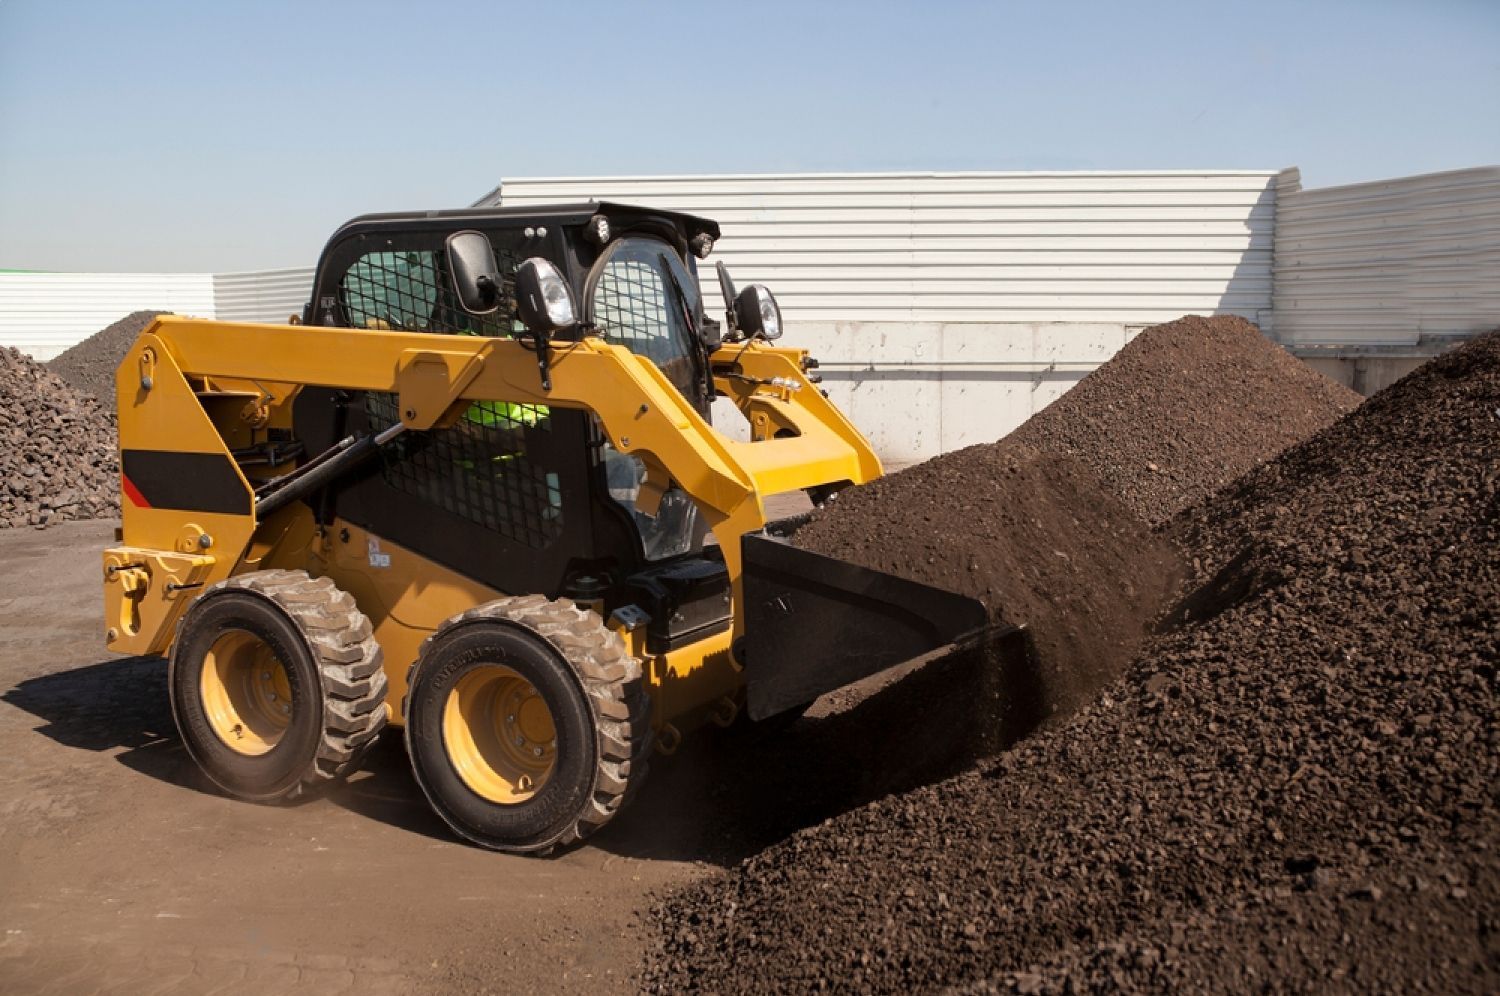 Skid steer dry hire: frequently asked questions